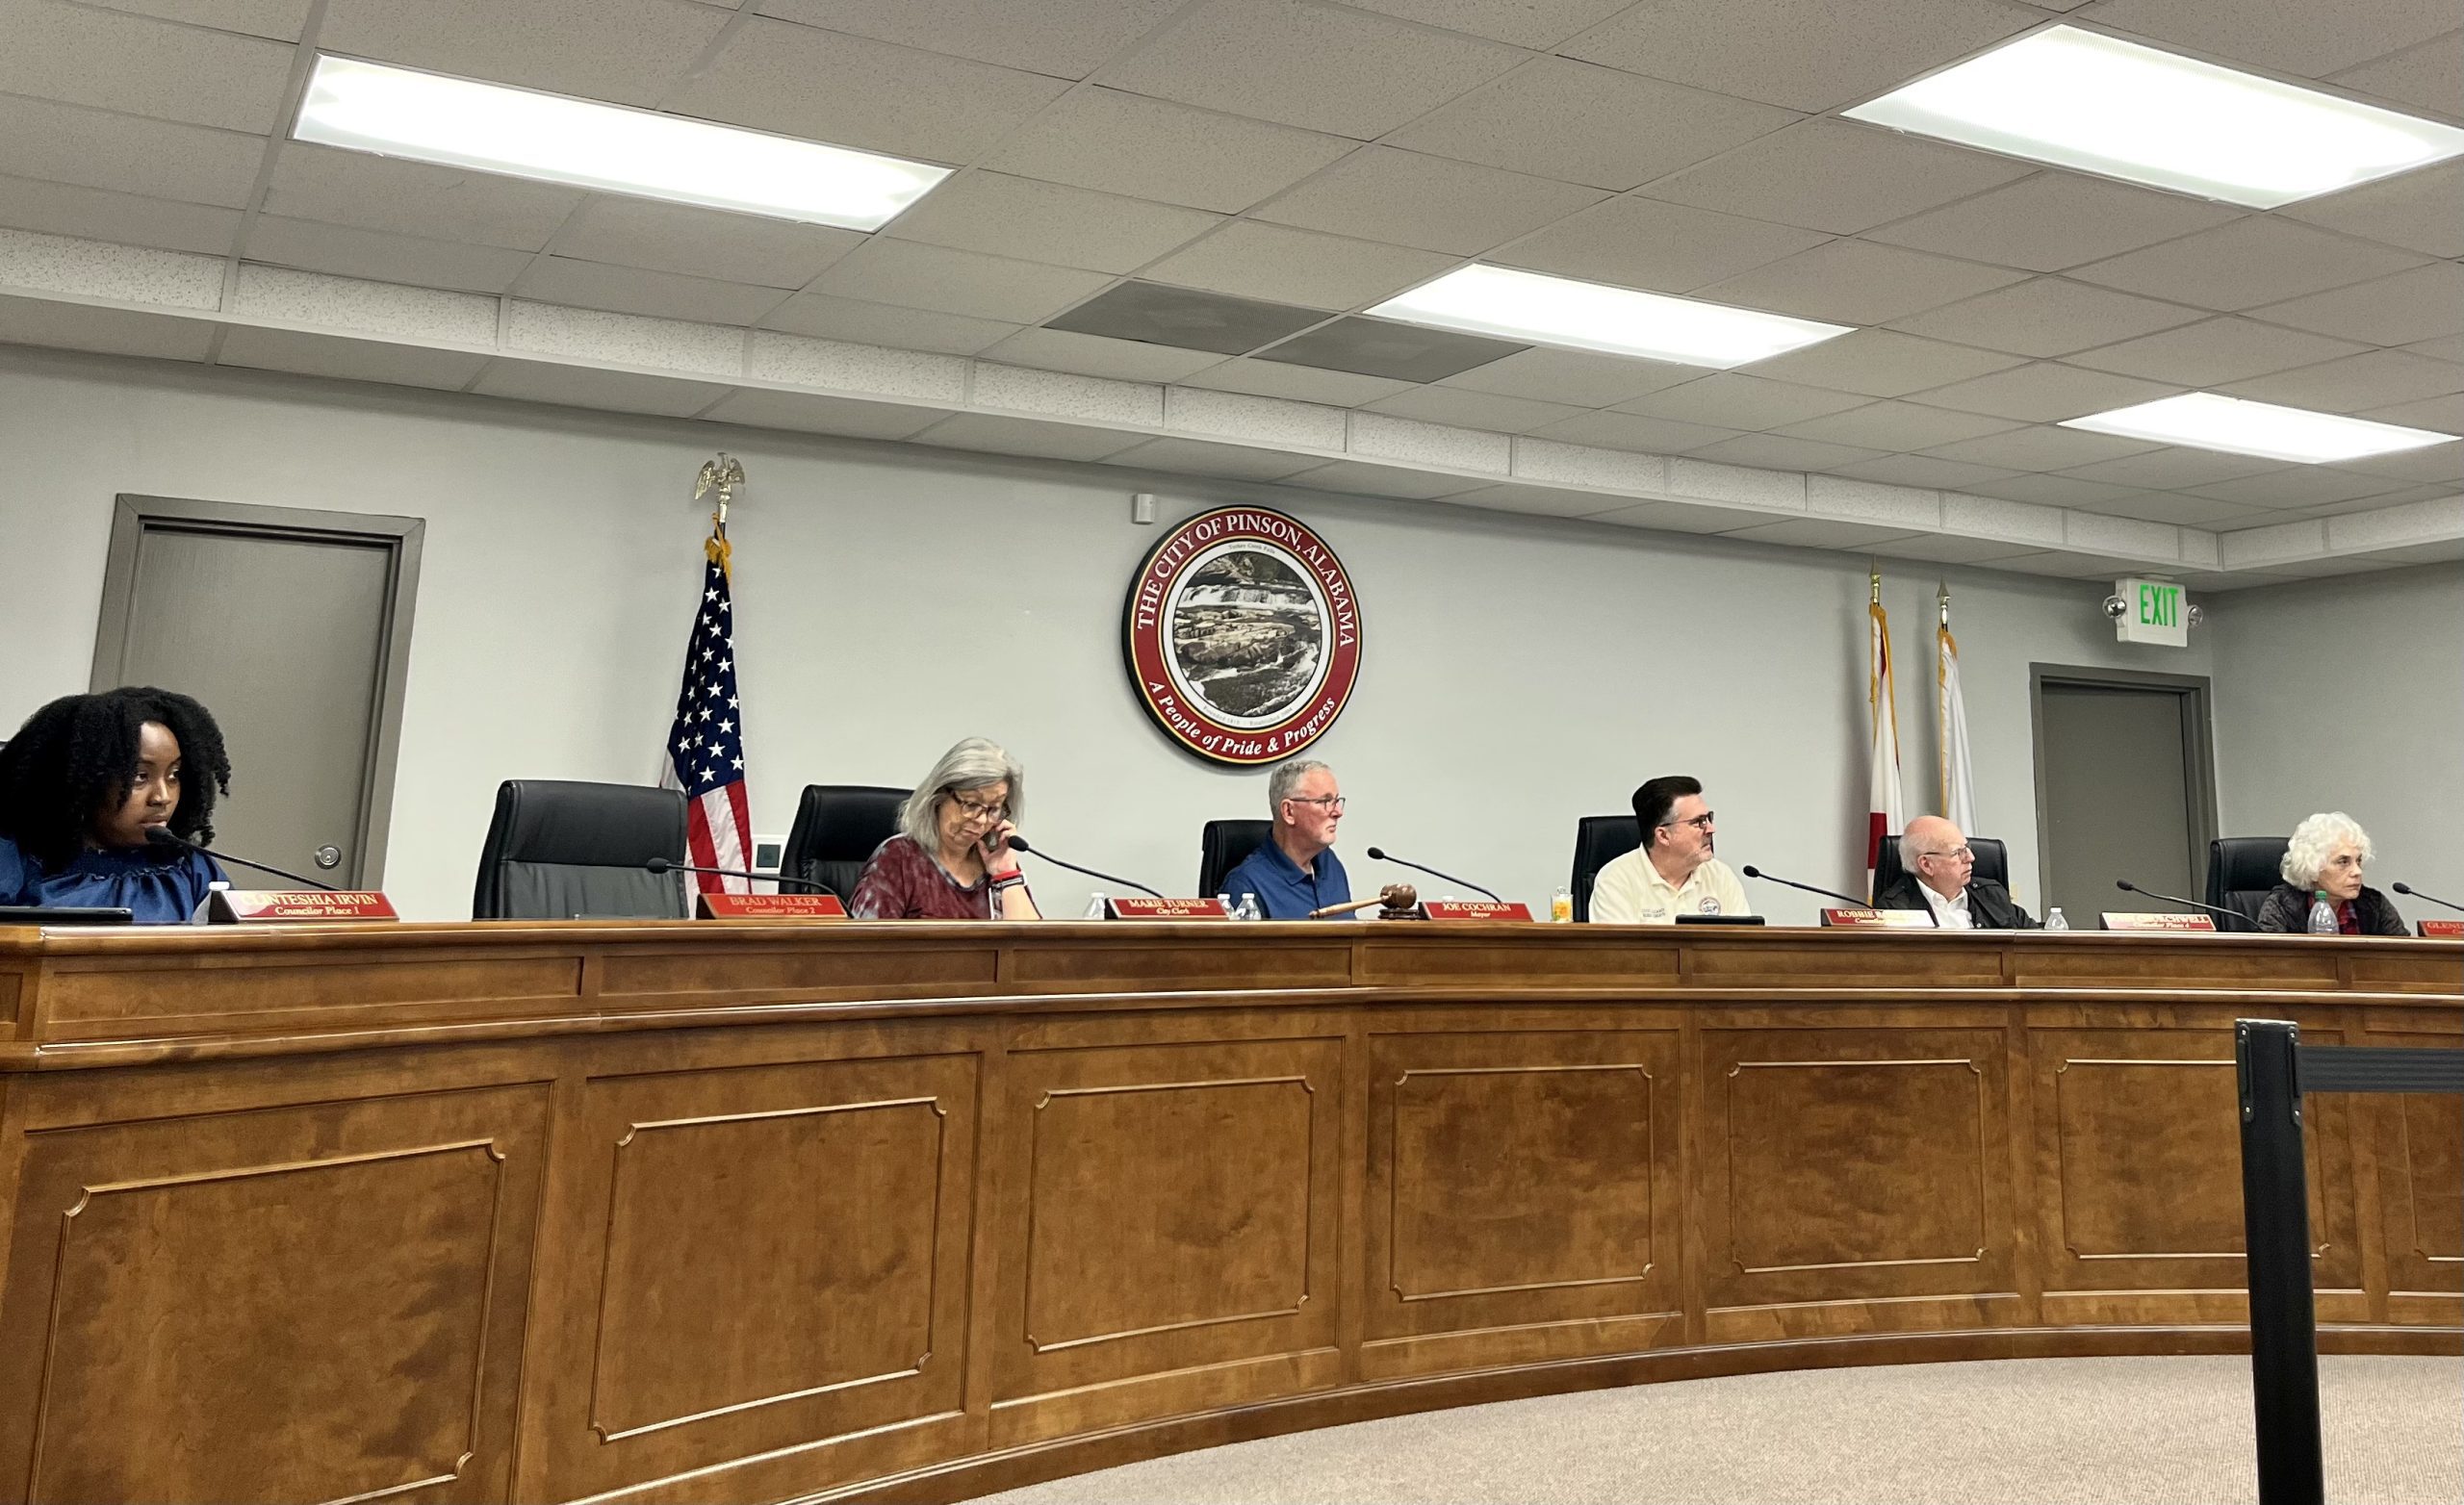 Pinson City Council approves updated facility rental agreements